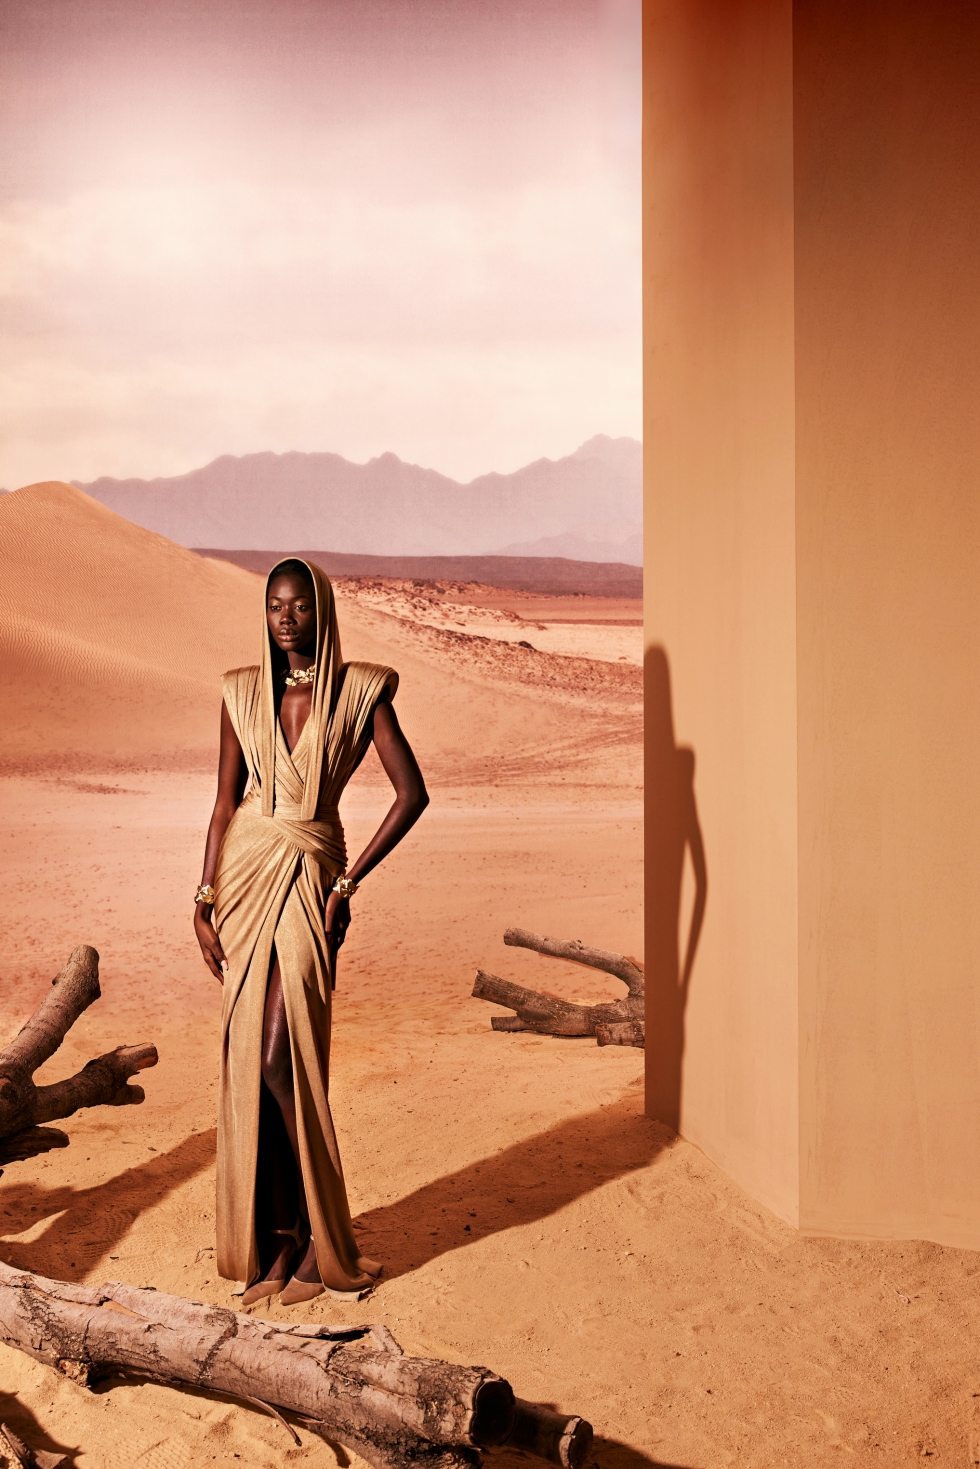 The Safari Sunset Fall Winter 2024-2025 Collection by Tony Ward